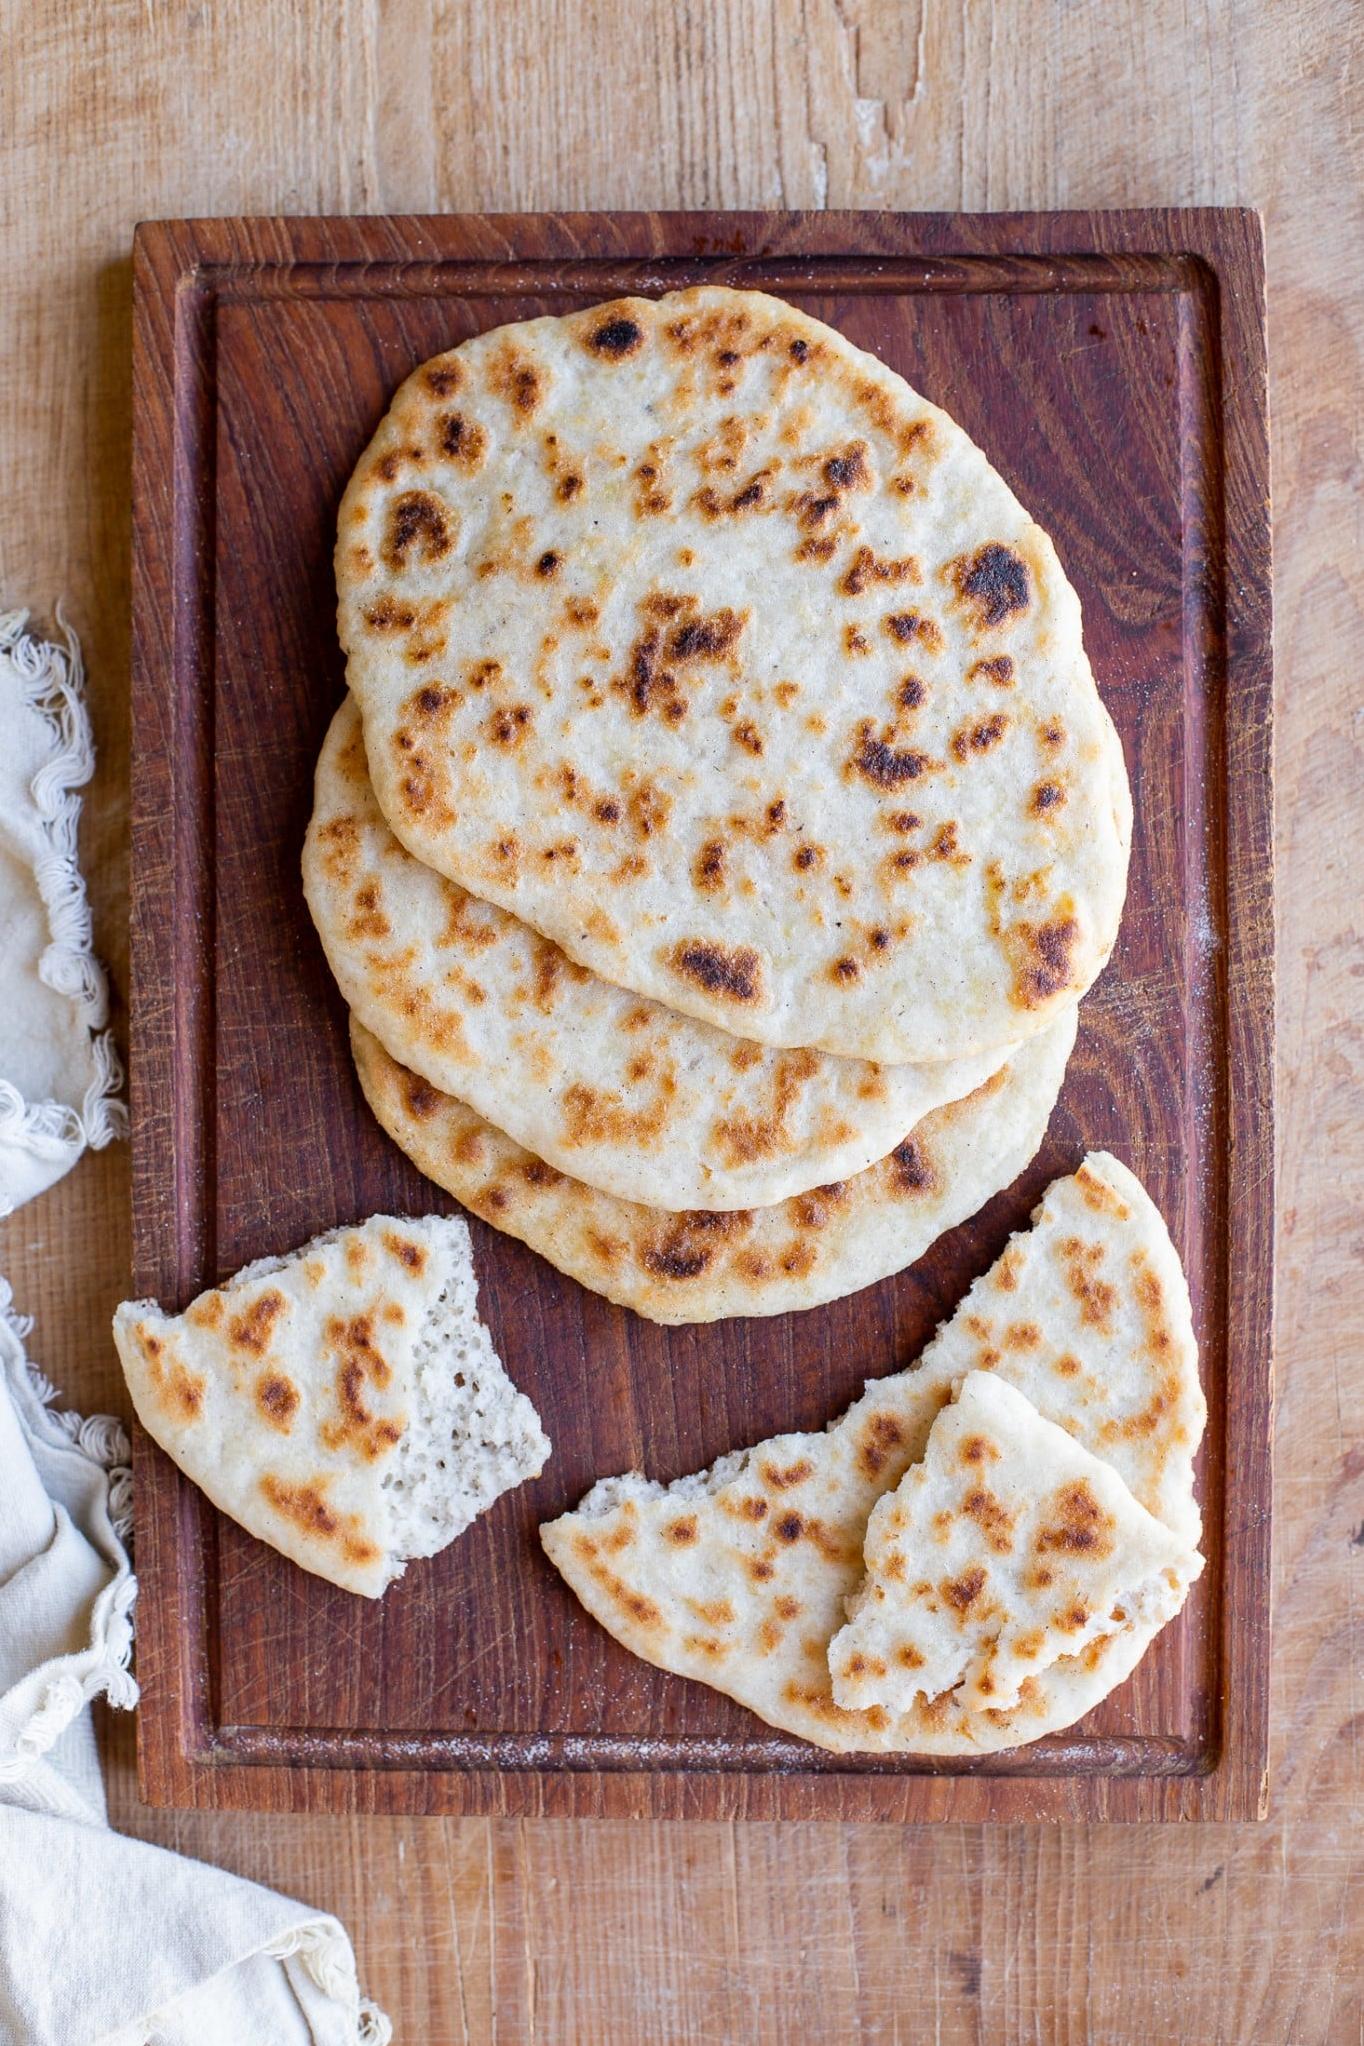  A gluten-free and yeast-free delight: this flat bread will become your new favorite